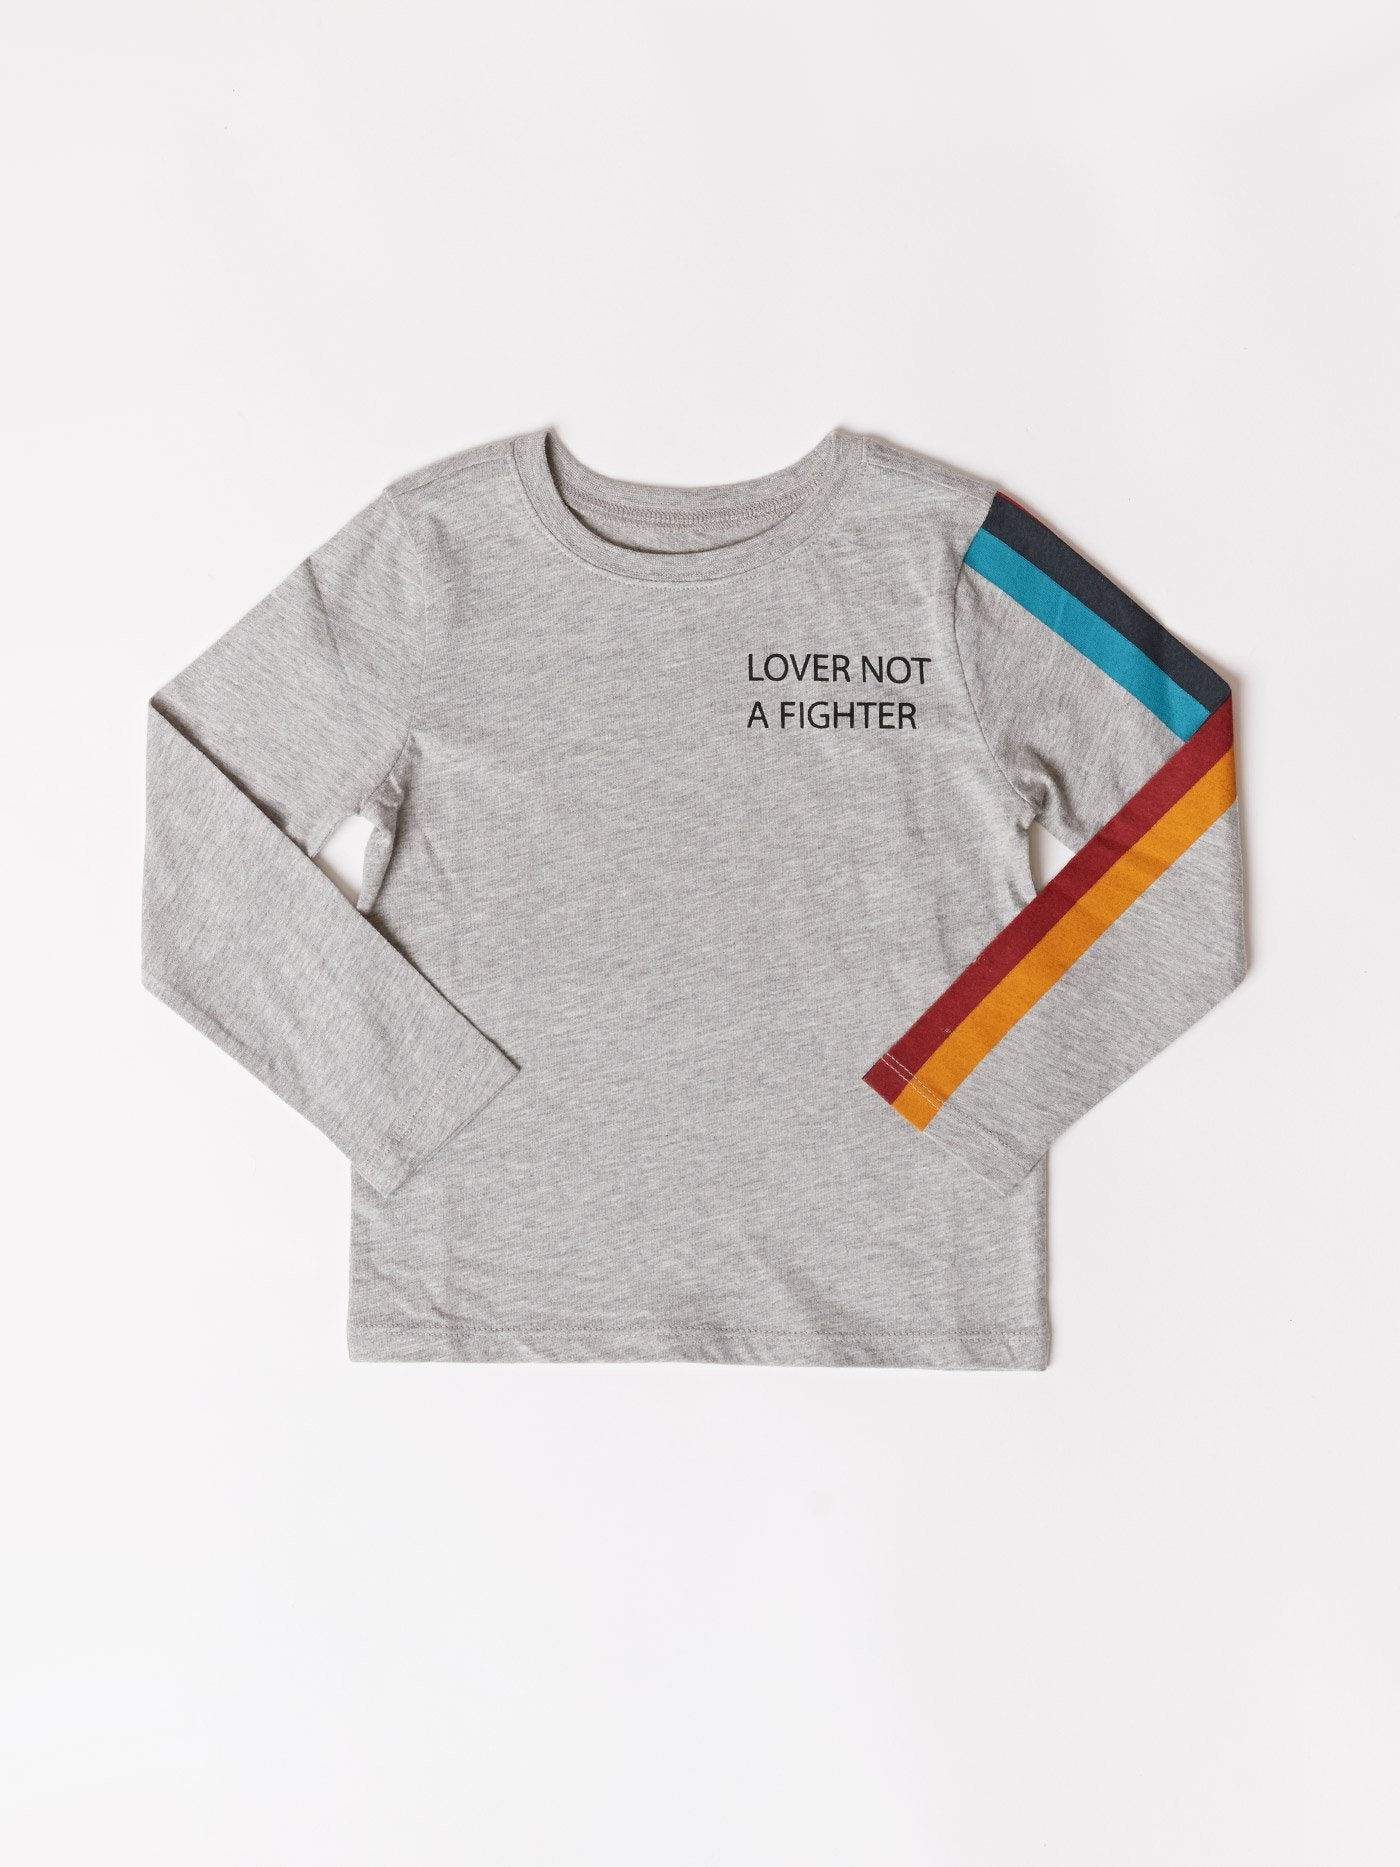 Toddler Stripe Graphic Ls Tee Boys Tops Theo+Leigh 